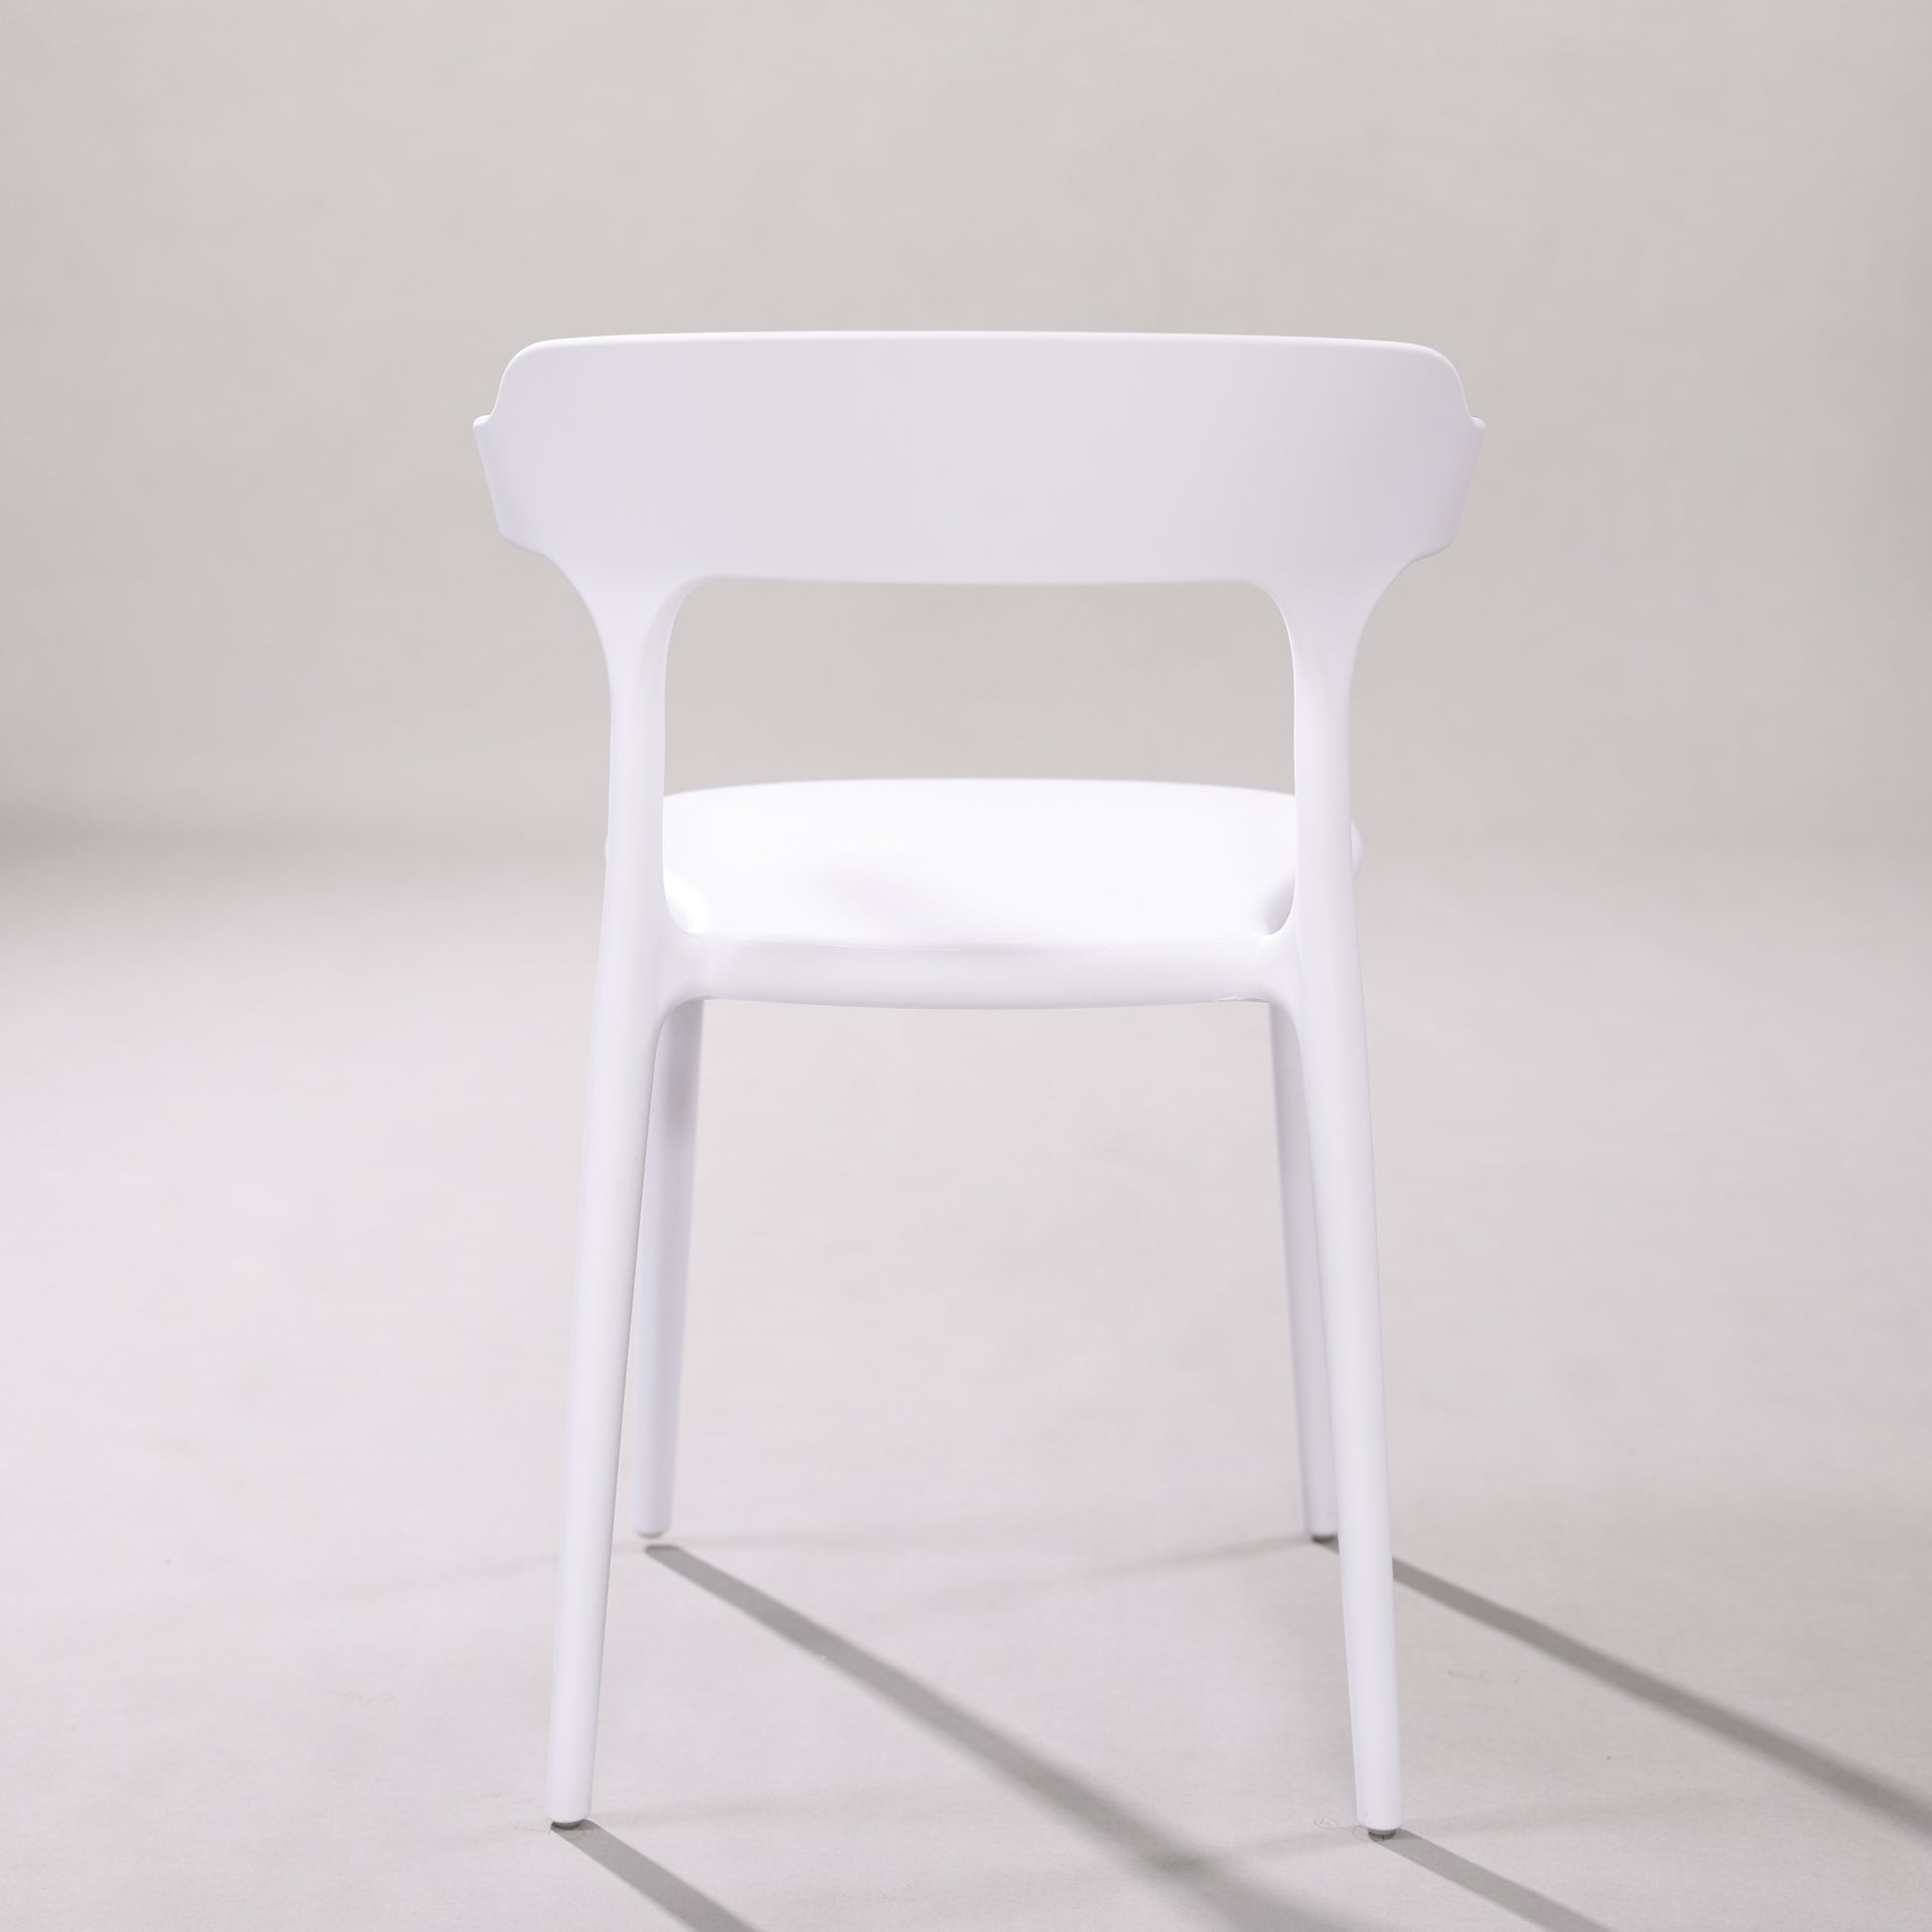 Cafeteria Chair C3001 FC